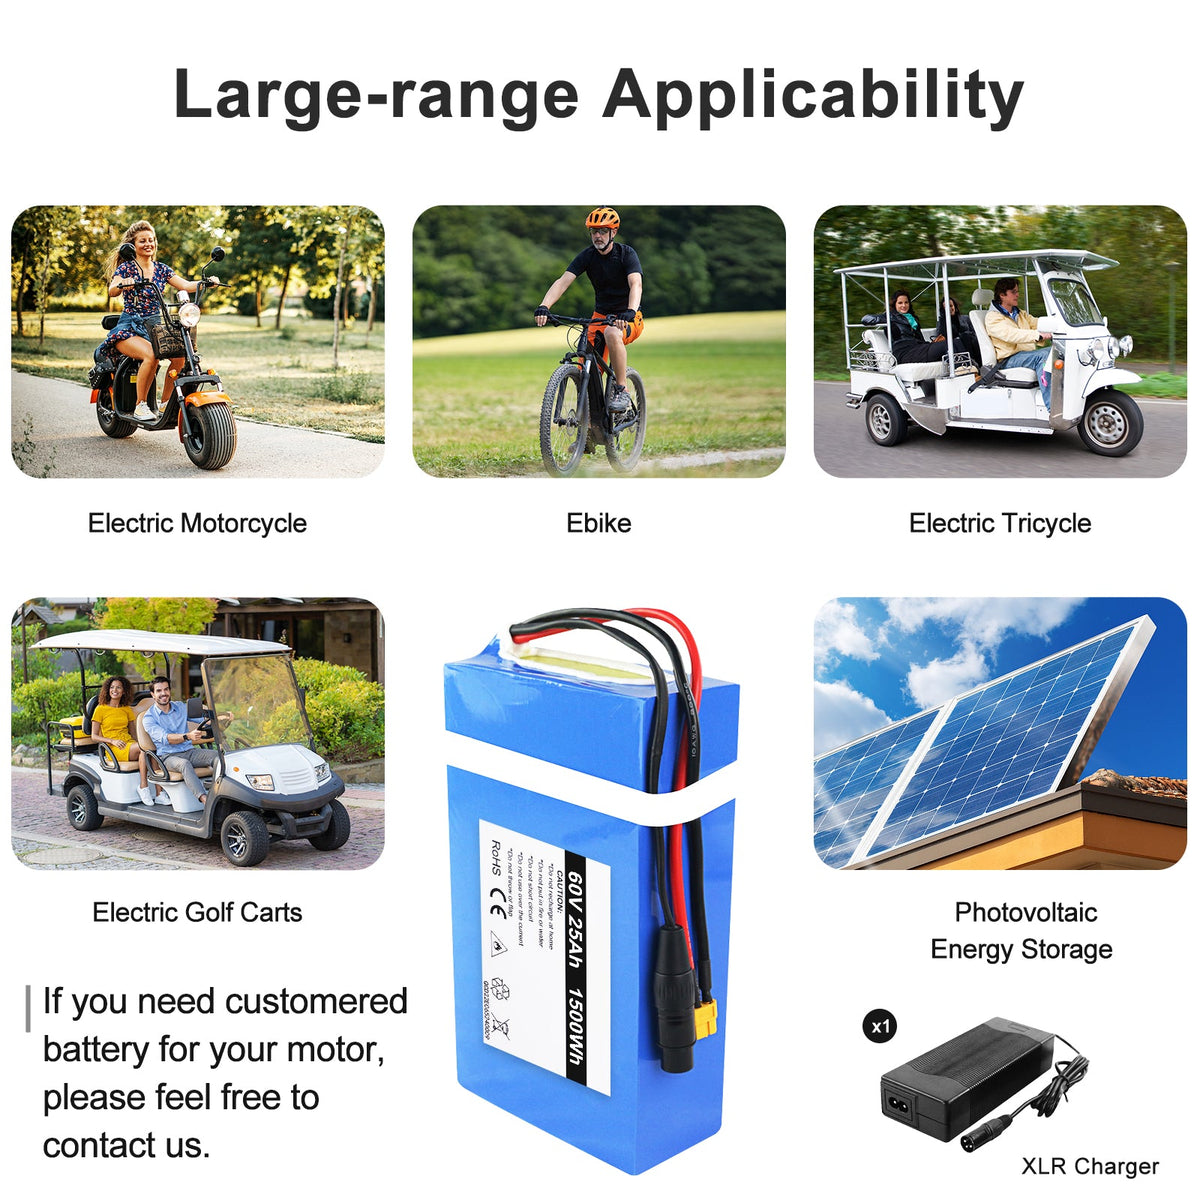 60V 25AH Ebike Lithium Battery for 2200W Motor, Waterproof lithium Pack for Motercyckle, Go-kart, Scooter